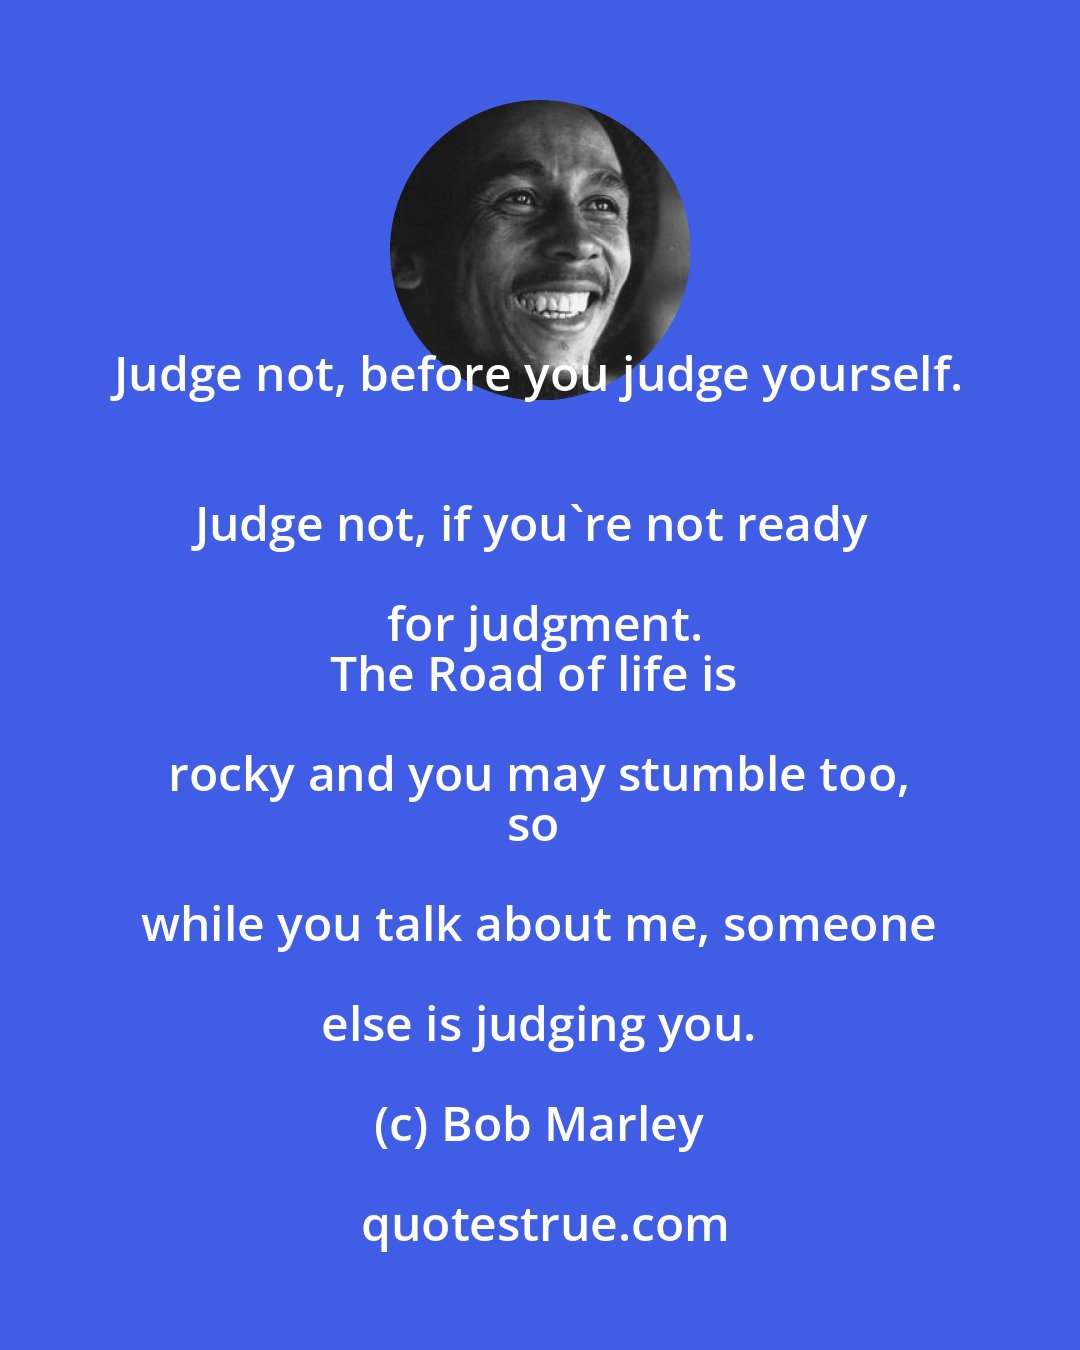 Bob Marley: Judge not, before you judge yourself. 
Judge not, if you're not ready for judgment.
The Road of life is rocky and you may stumble too, 
so while you talk about me, someone else is judging you.